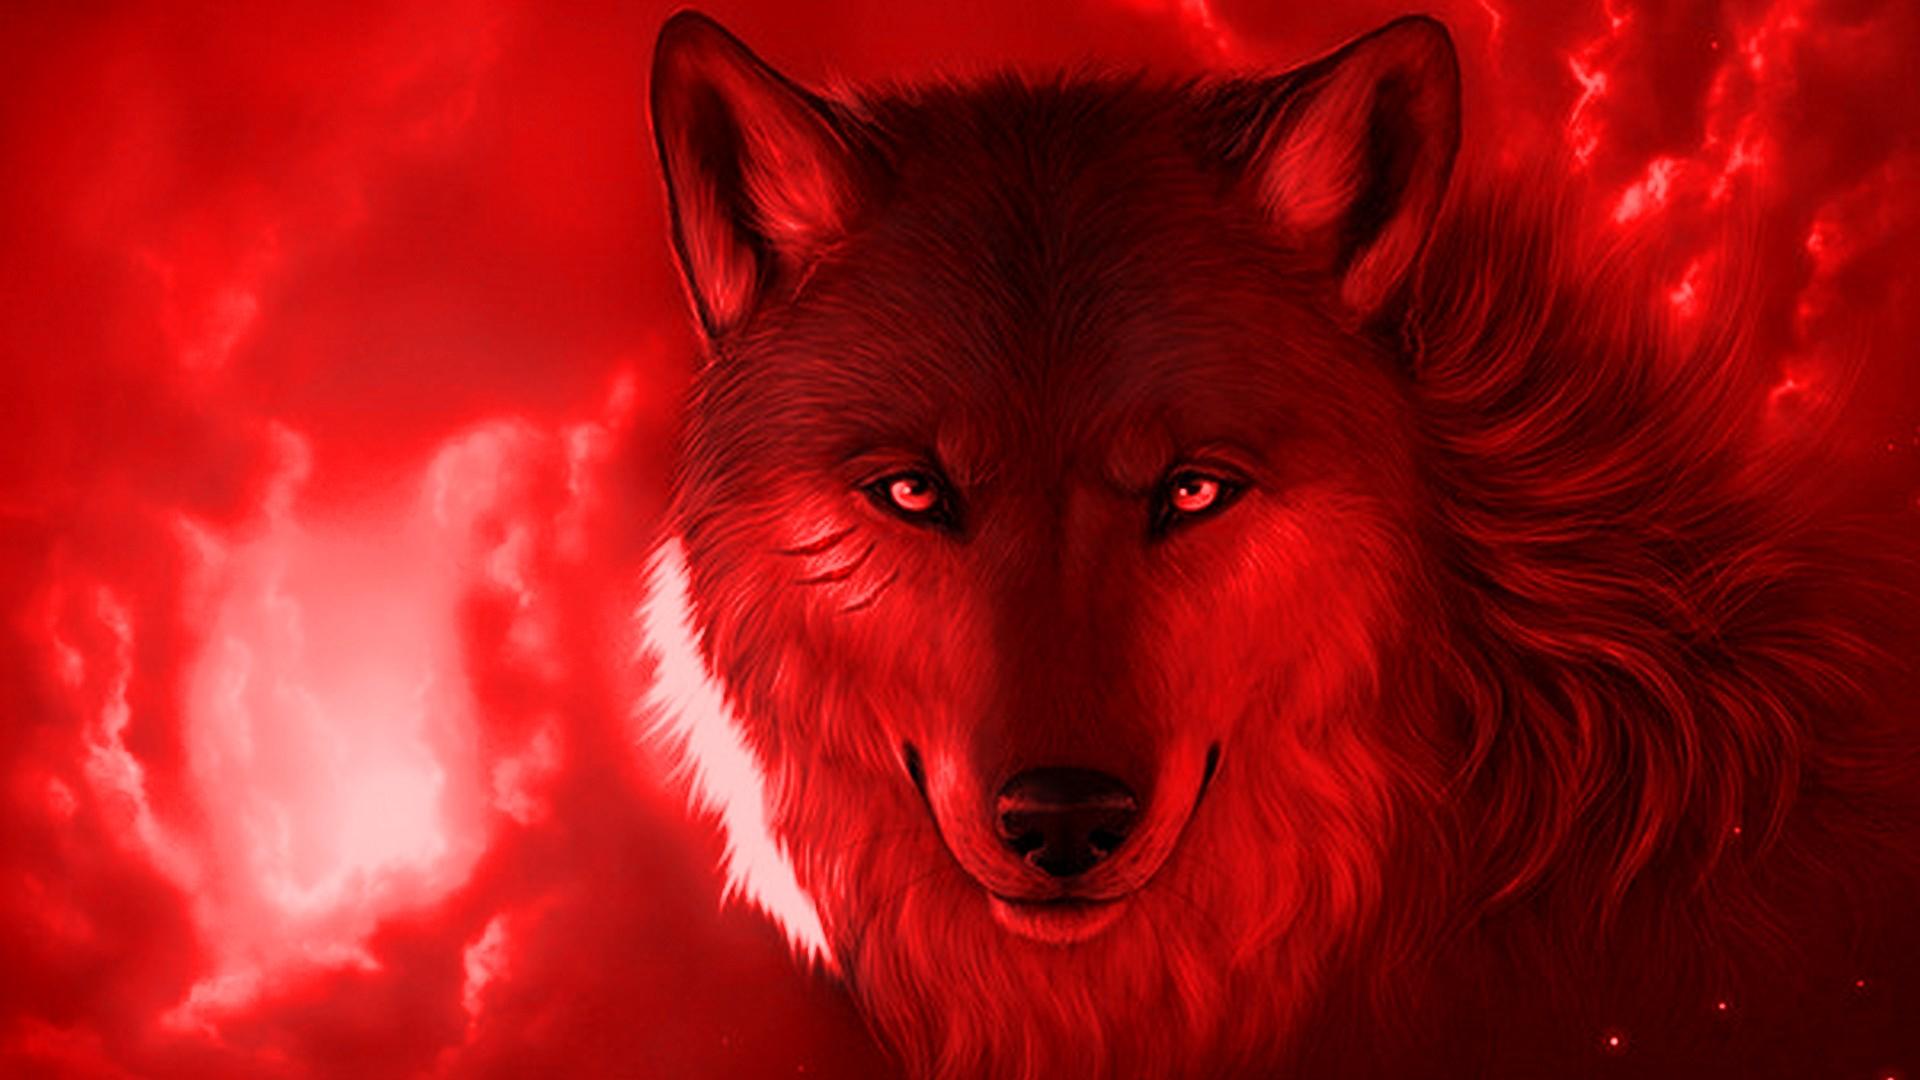 Red Wolf wallpaper by Graphistun1919  Download on ZEDGE  ac0d